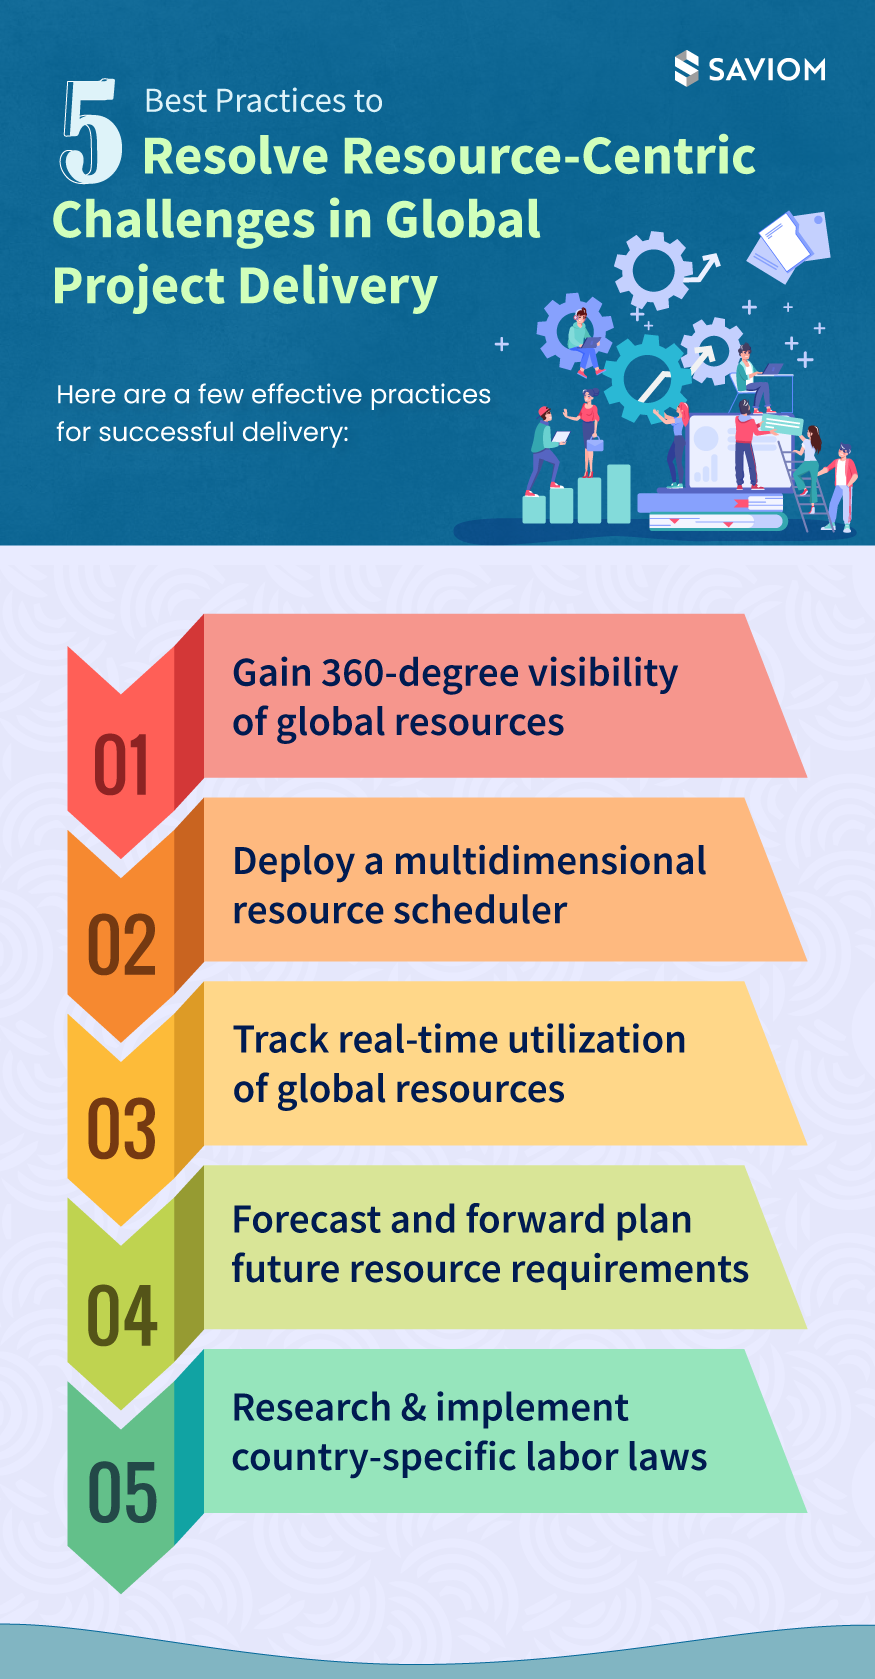 5 Best Practices to Resolve Resource-Centric Challenges in Global Project Delivery